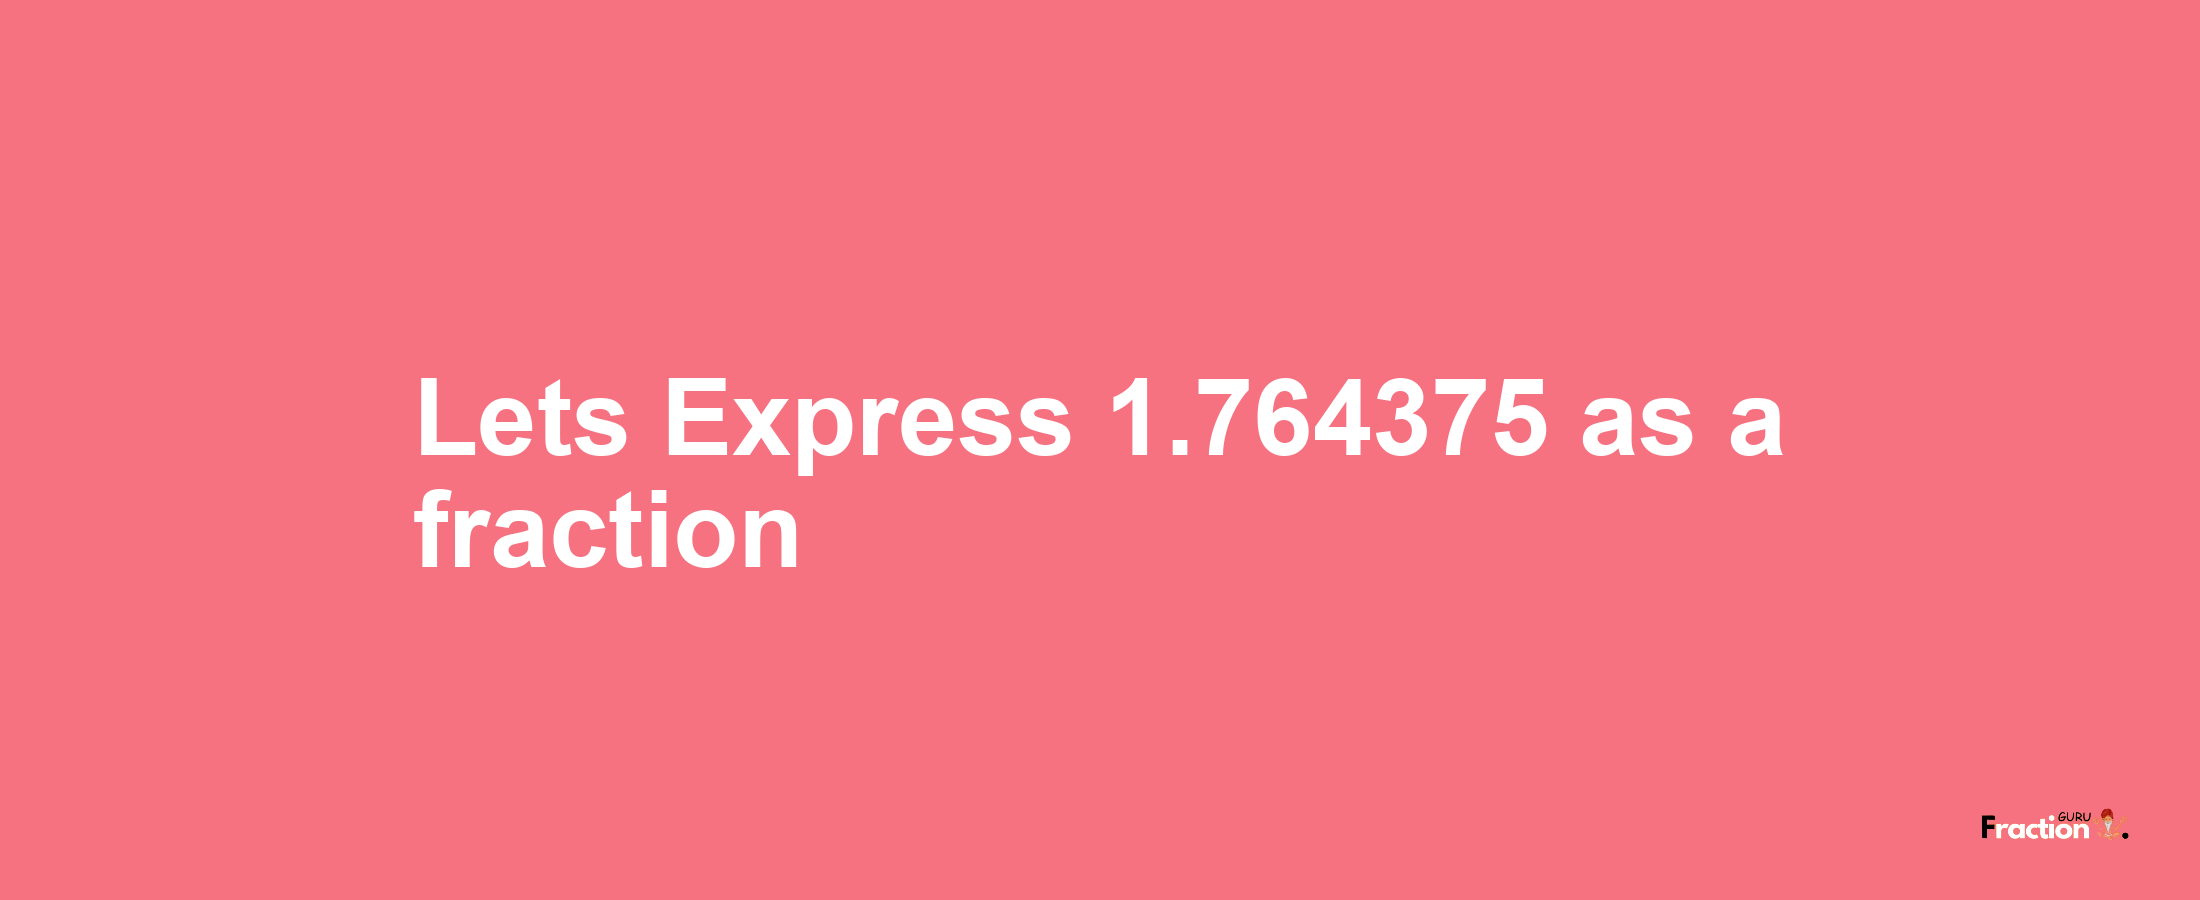 Lets Express 1.764375 as afraction